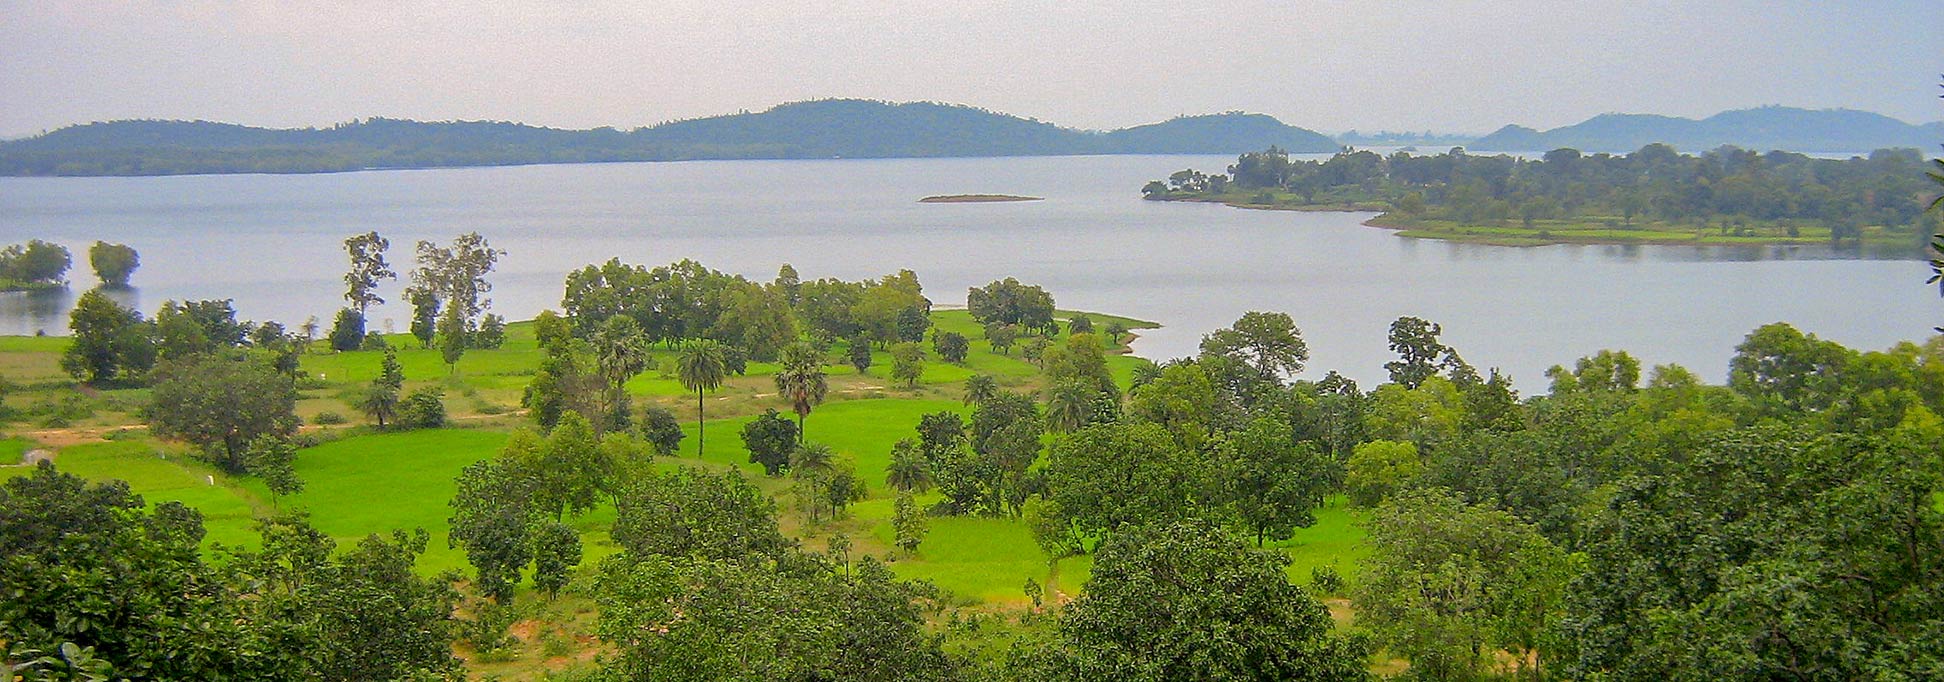 Jharkhand landscape with water reservoir